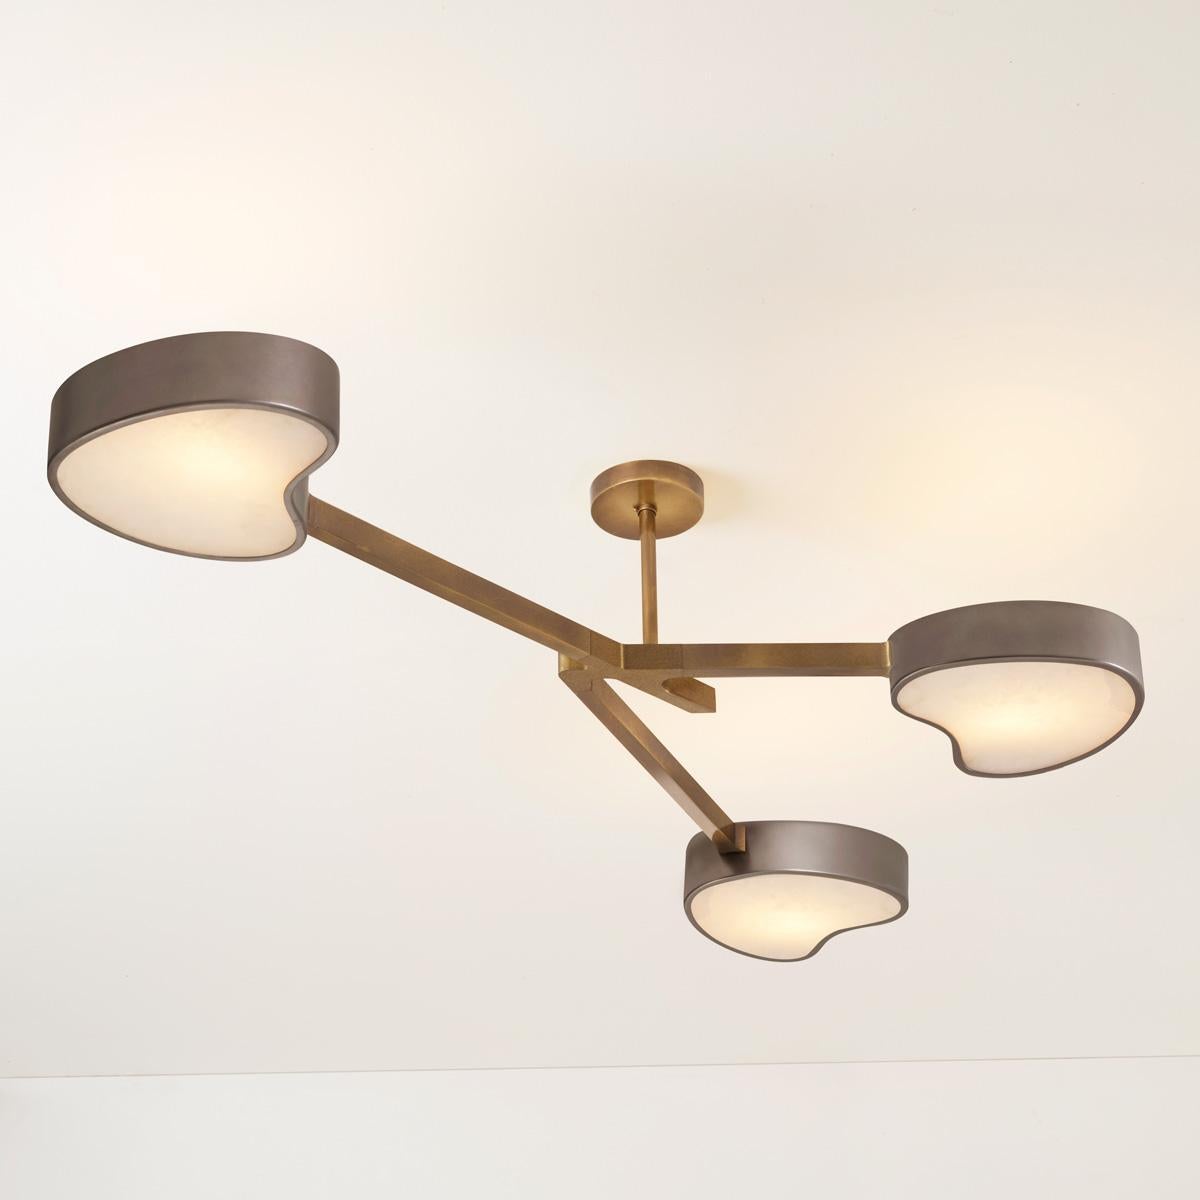 Cuore N.3 Ceiling Light by Gaspare Asaro. Polished Brass Finish For Sale 5